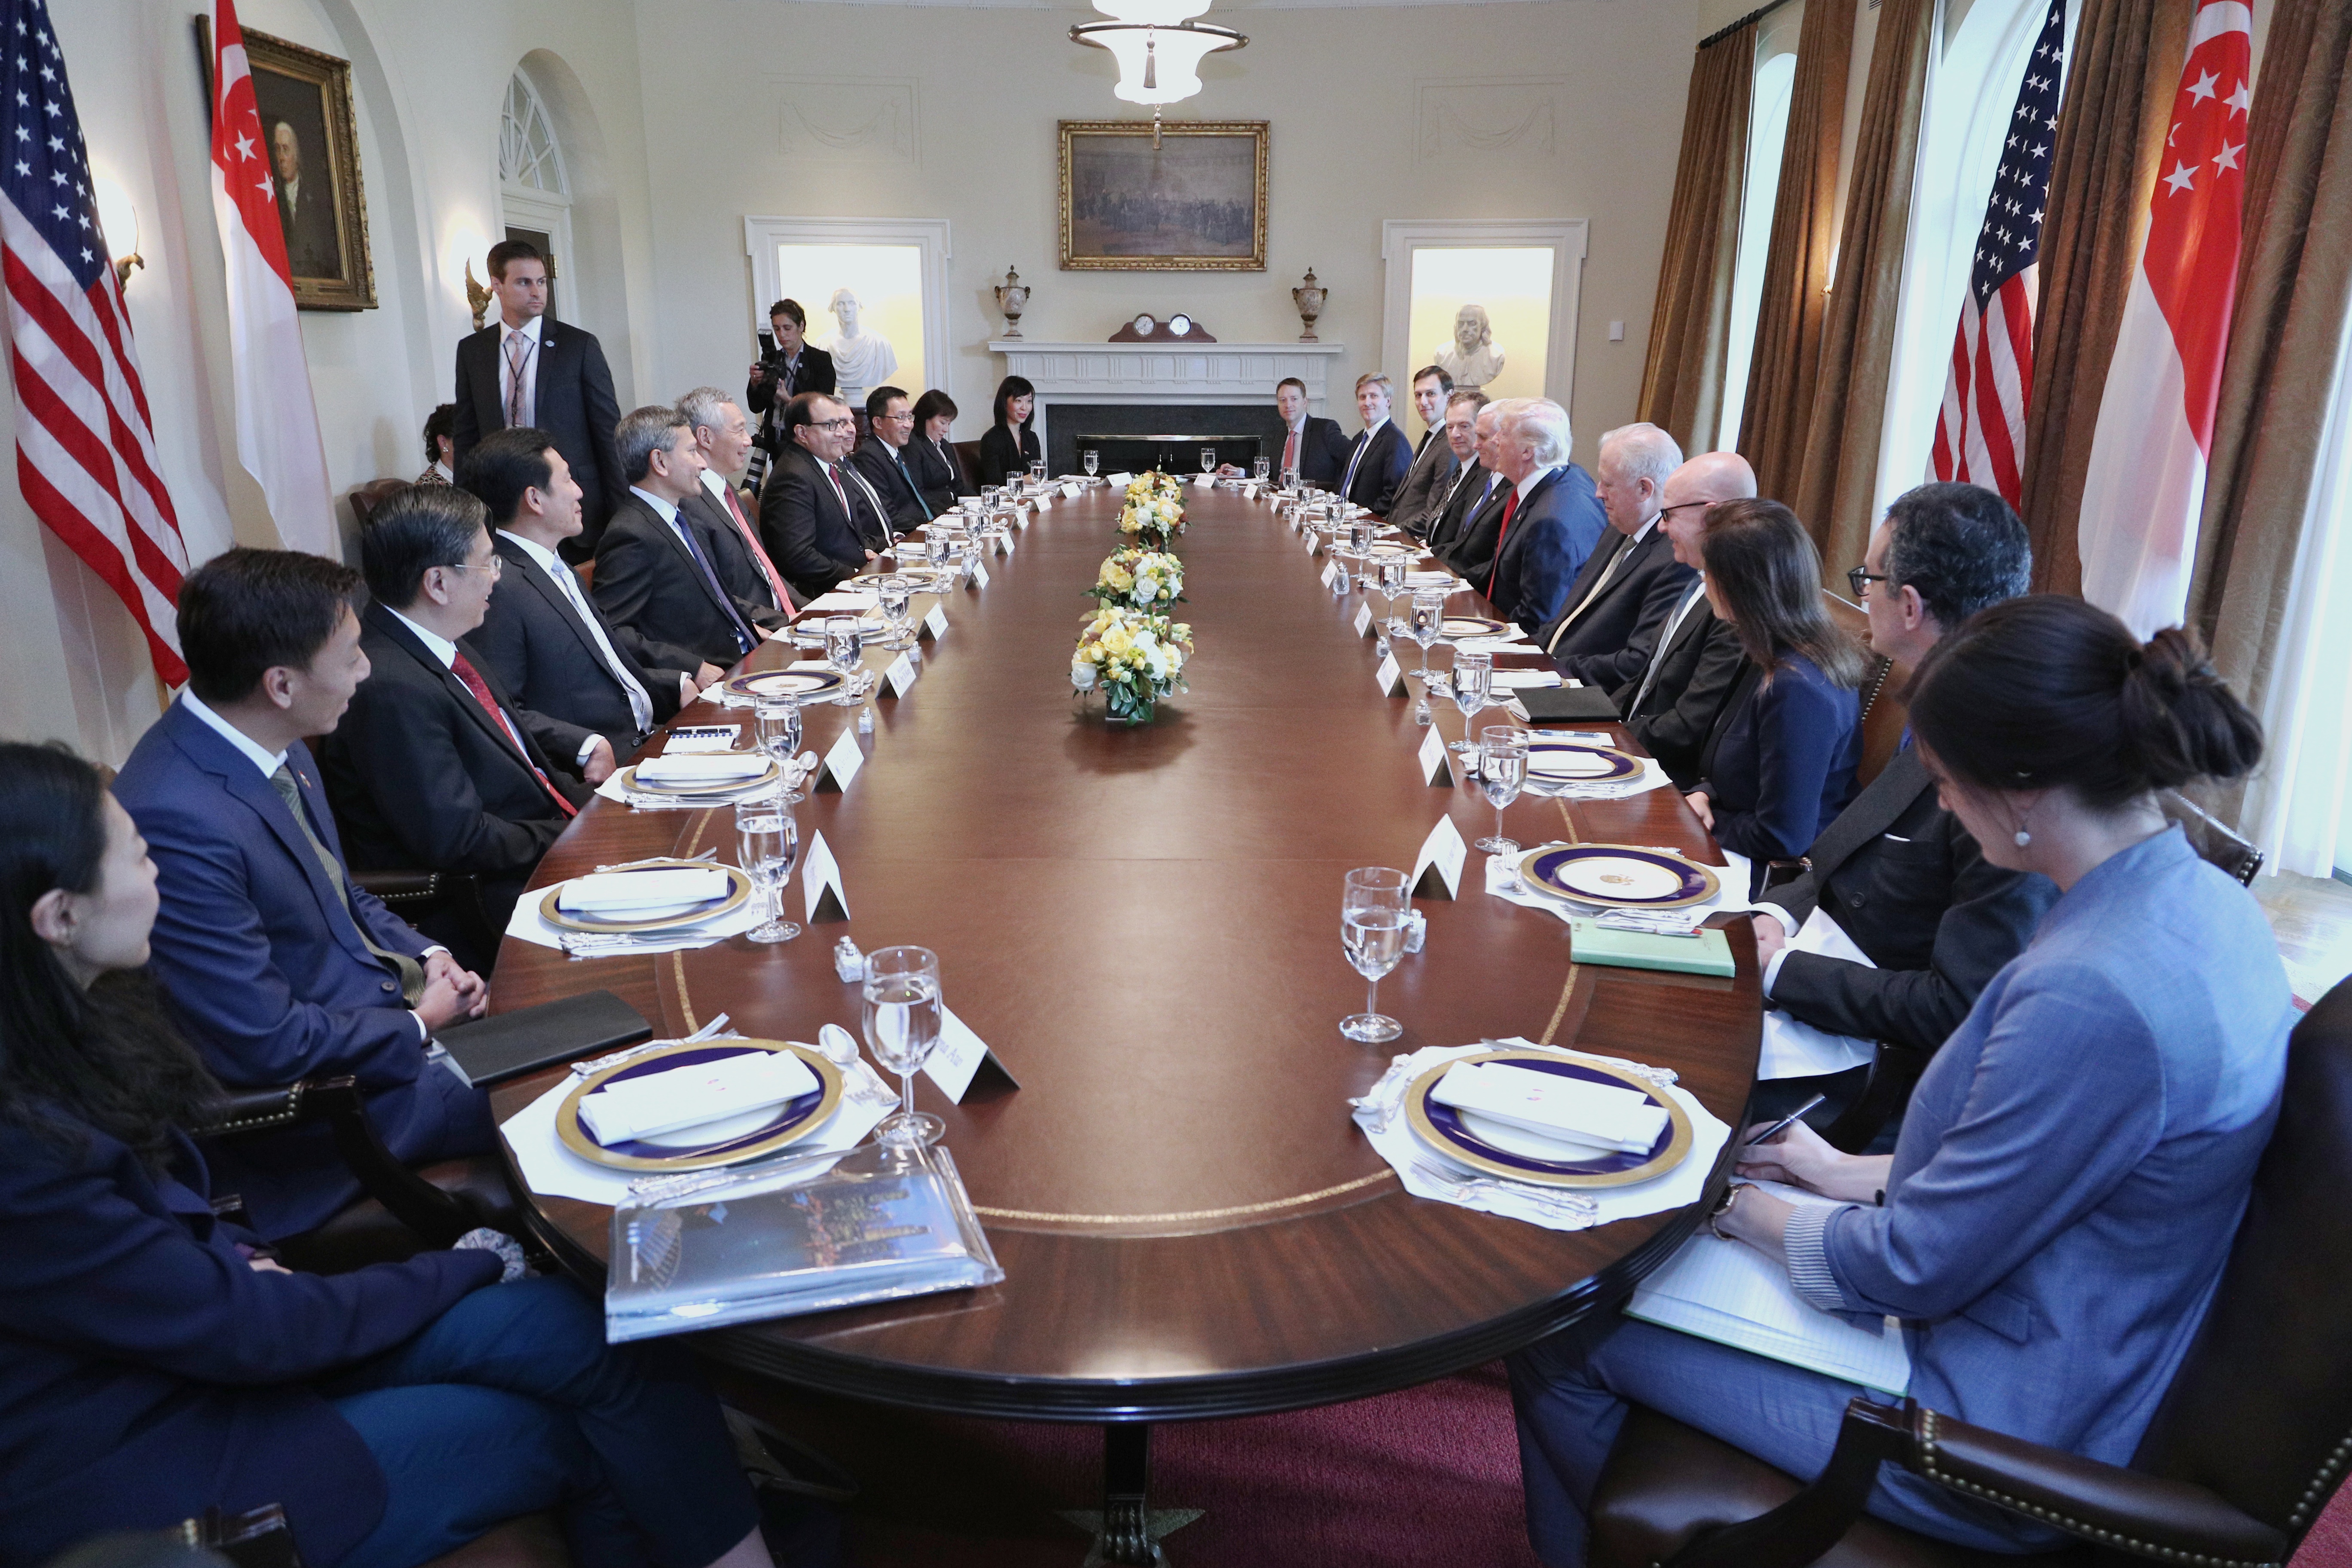 PM Lee Hsien Loong at bilateral working lunch with Cabinet Secretaries and key White House officials on 23 Oct 2017 (MCI Photo by Kenji Soon)